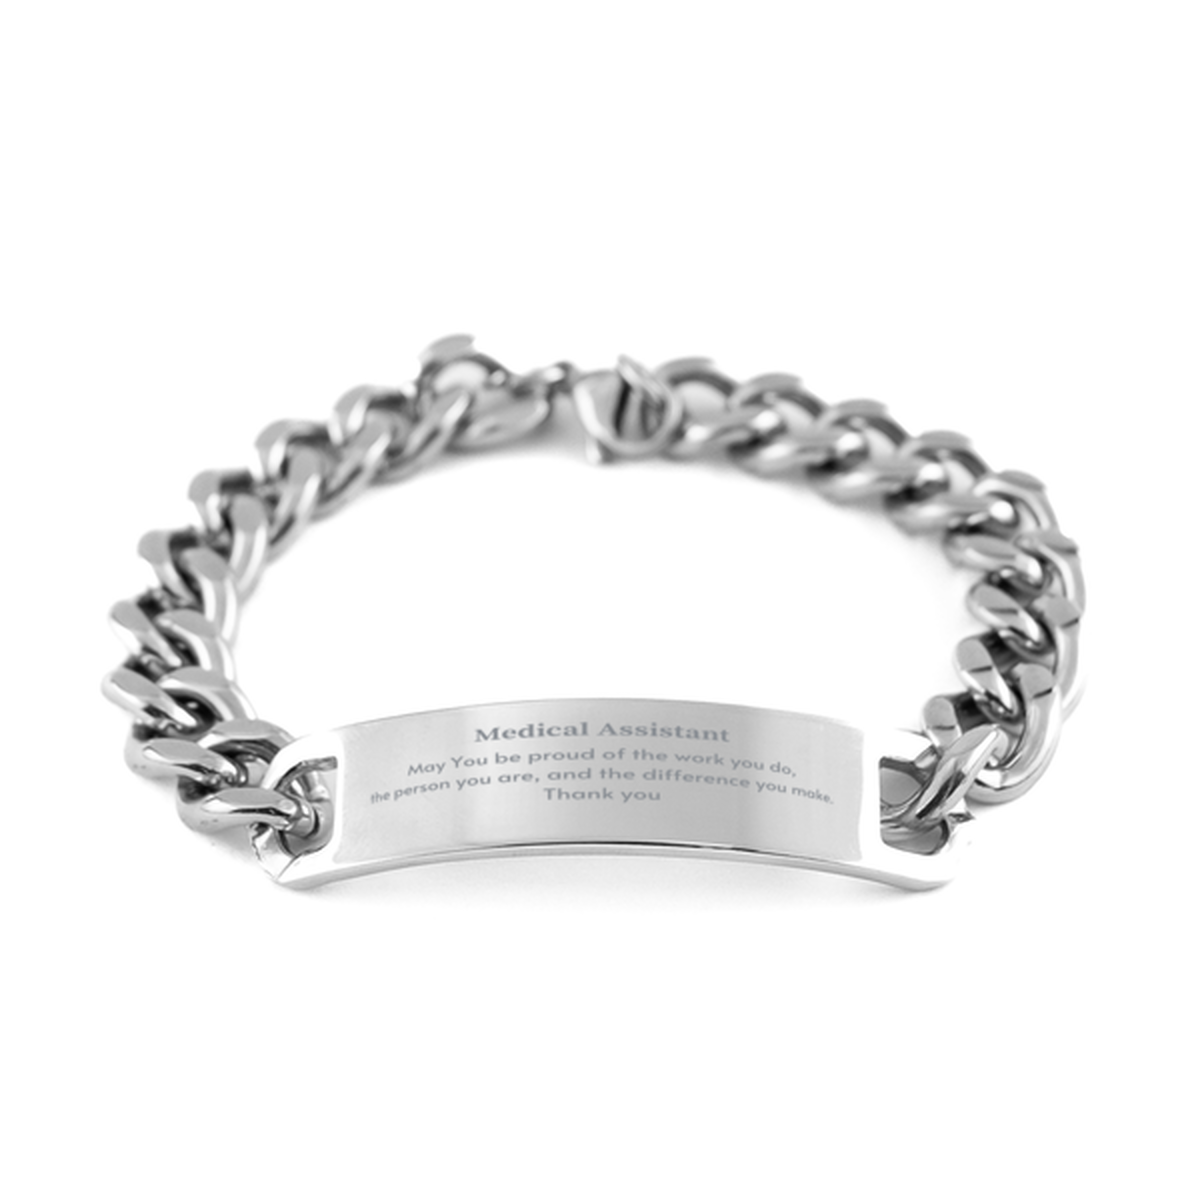 Heartwarming Cuban Chain Stainless Steel Bracelet Retirement Coworkers Gifts for Medical Assistant, Medical Assistant May You be proud of the work you do, the person you are Gifts for Boss Men Women Friends